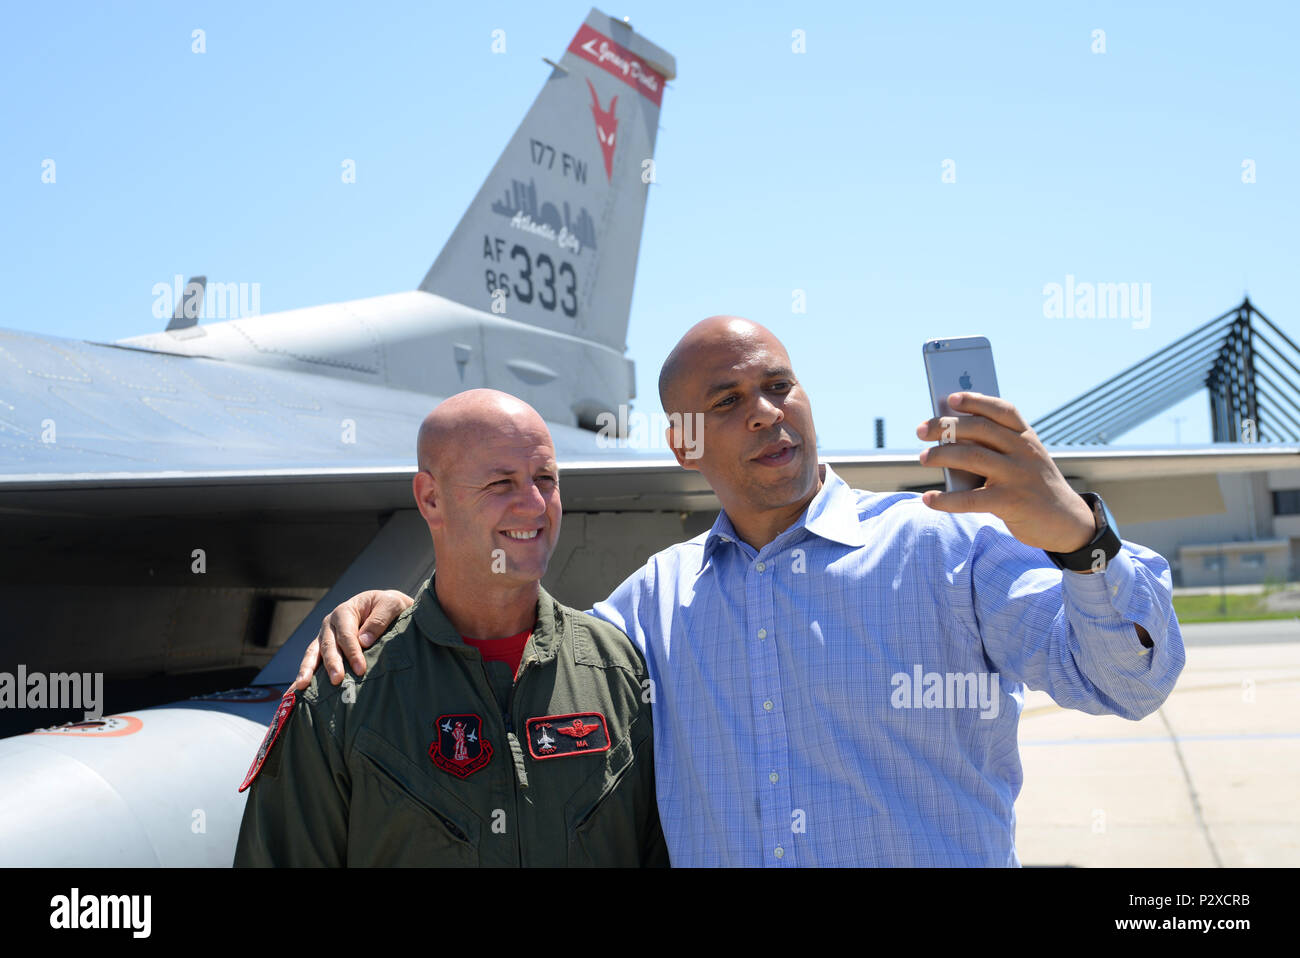 Cory Booker, U.S. Senator from New Jersey, records a Snapchat with U.S. Air Force Col. John R. DiDonna, Wing Commander of the New Jersey National Guard's 177th Fighter Wing, during a visit to the Wing in Egg Harbor Township, N.J. on Aug. 5, 2016. It was the first visit to the New Jersey Air National Guard base by Sen. Booker, who received a briefing by DiDonna, flew an F-16 simulator and got a chance to get an up-close look at the Wing jet on the flight line at the Atlantic City Air National Guard base. (U.S. Air National Guard photo by Master Sgt. Andrew J. Moseley/Released) Stock Photo